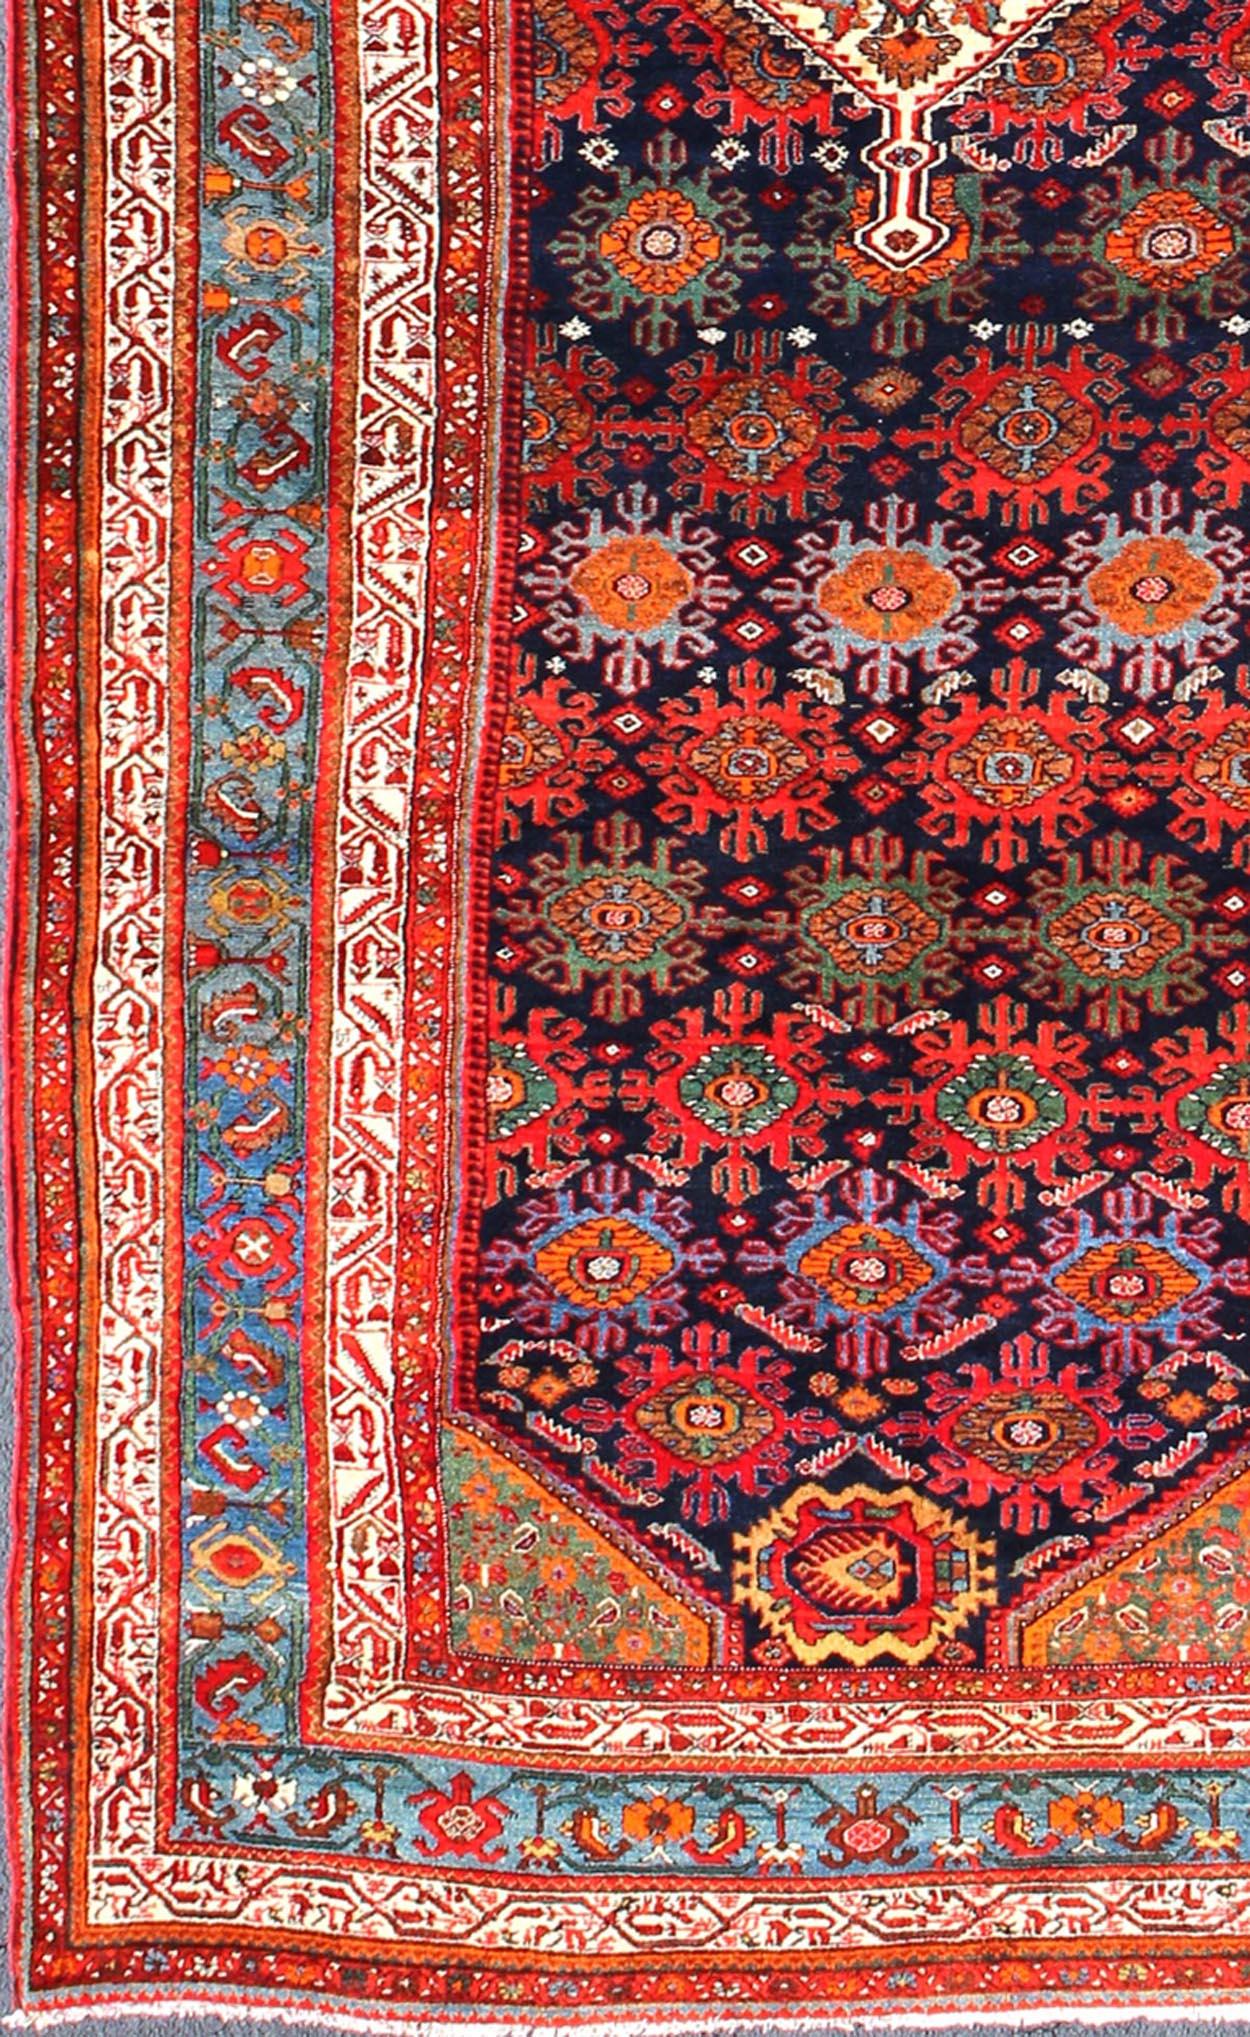 Multicolored antique Persian Malayer long and wide gallery runner with geometric medallion and motifs, rug ema-7582, country of origin / type: Iran / Malayer, circa 1910.

This lovely antique Persian Malayer runner originates from the northwest